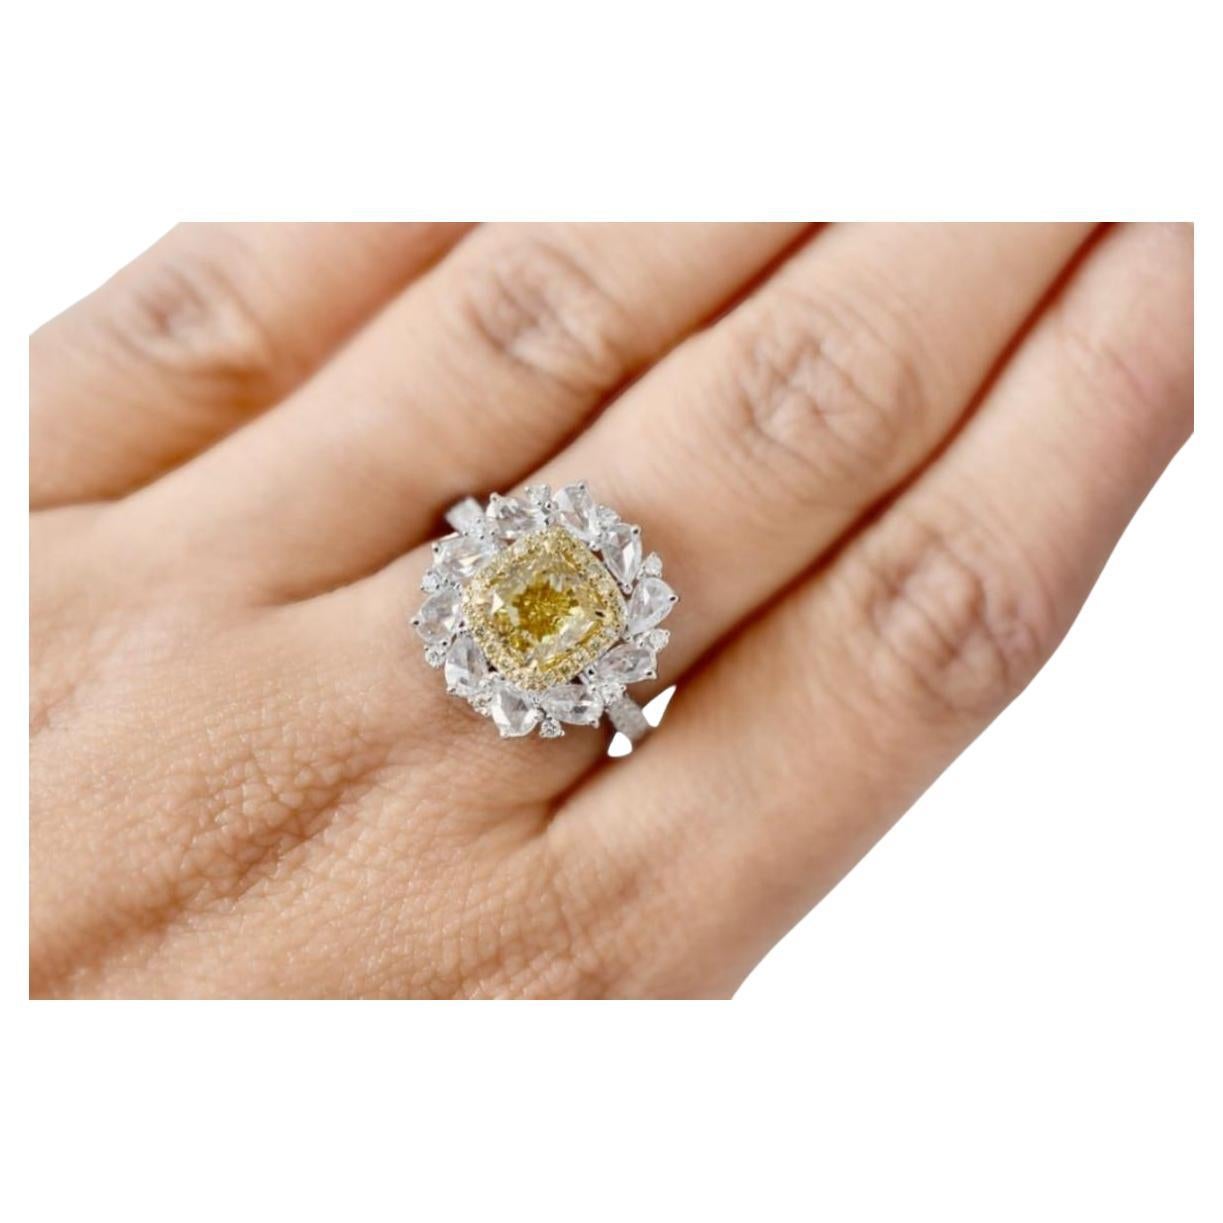 GIA Certified 2.00 Carat Fancy Brownish Yellow Diamond Ring VS2 Clarity For Sale